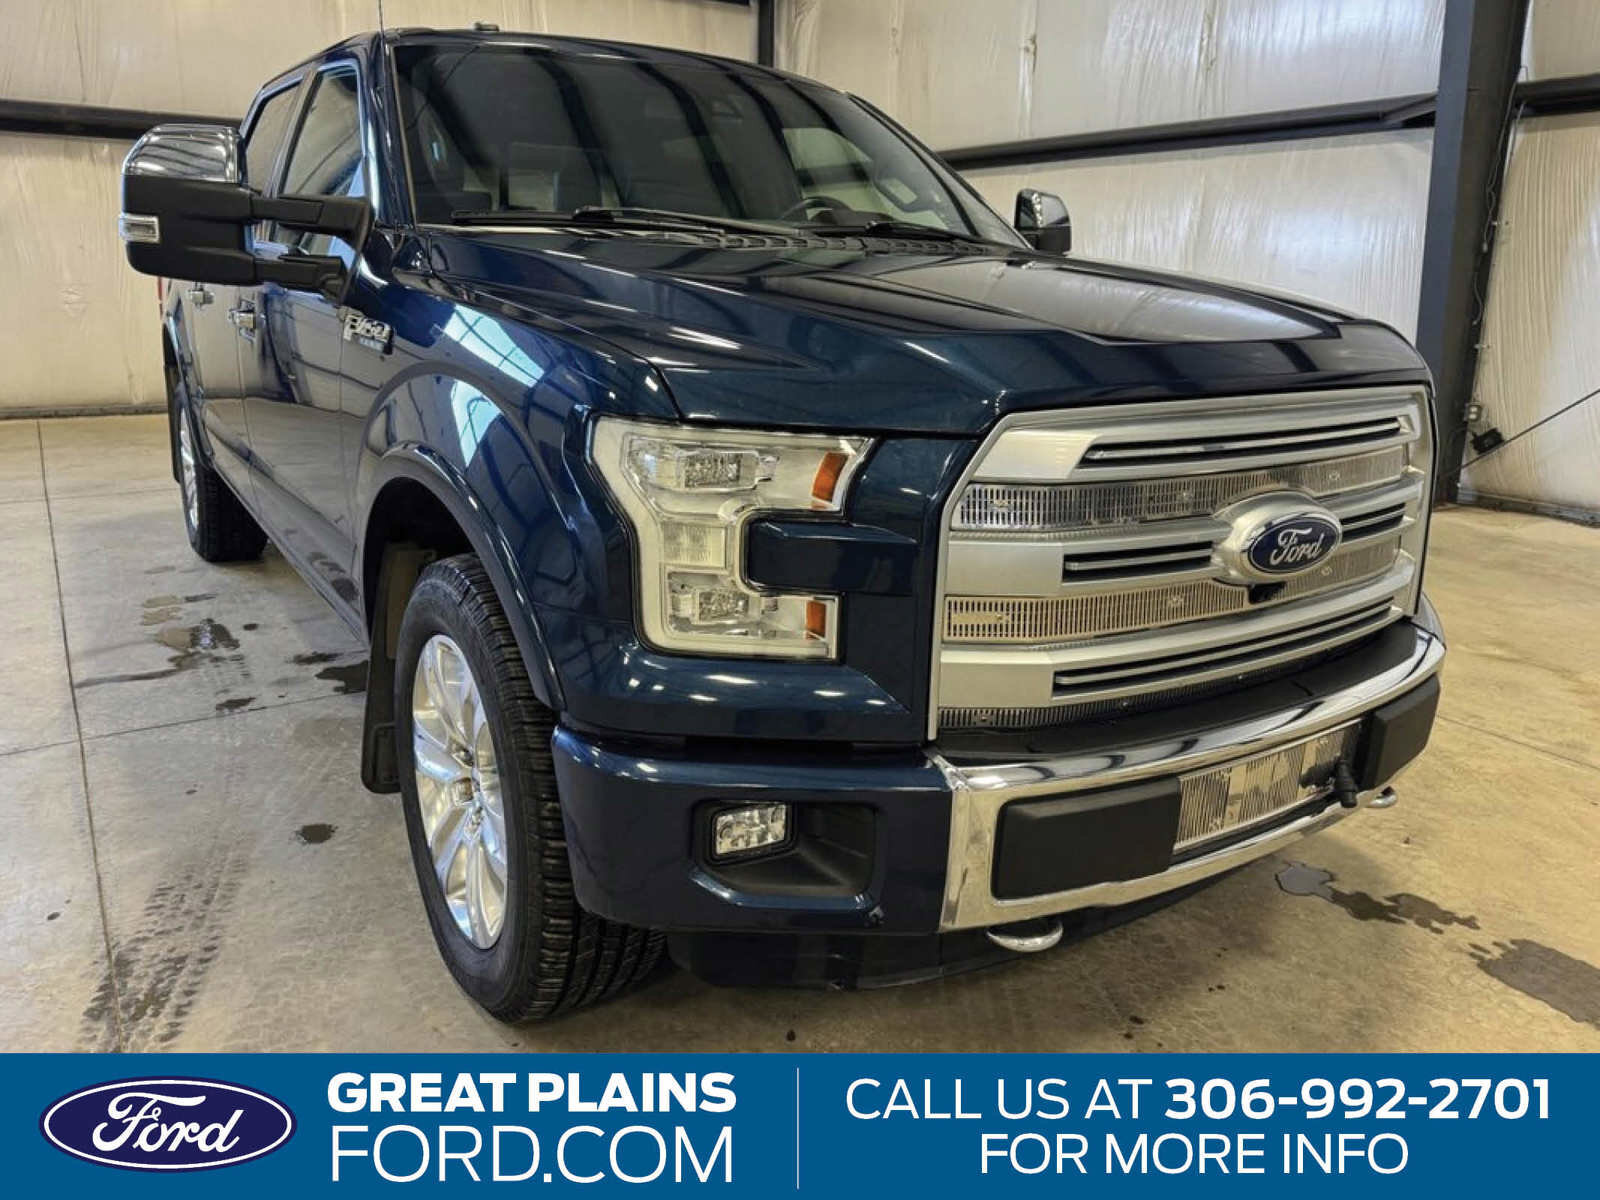 2016 Ford F-150 Platinum | 4x4 |  Heated & Cooled Leather Seats | 